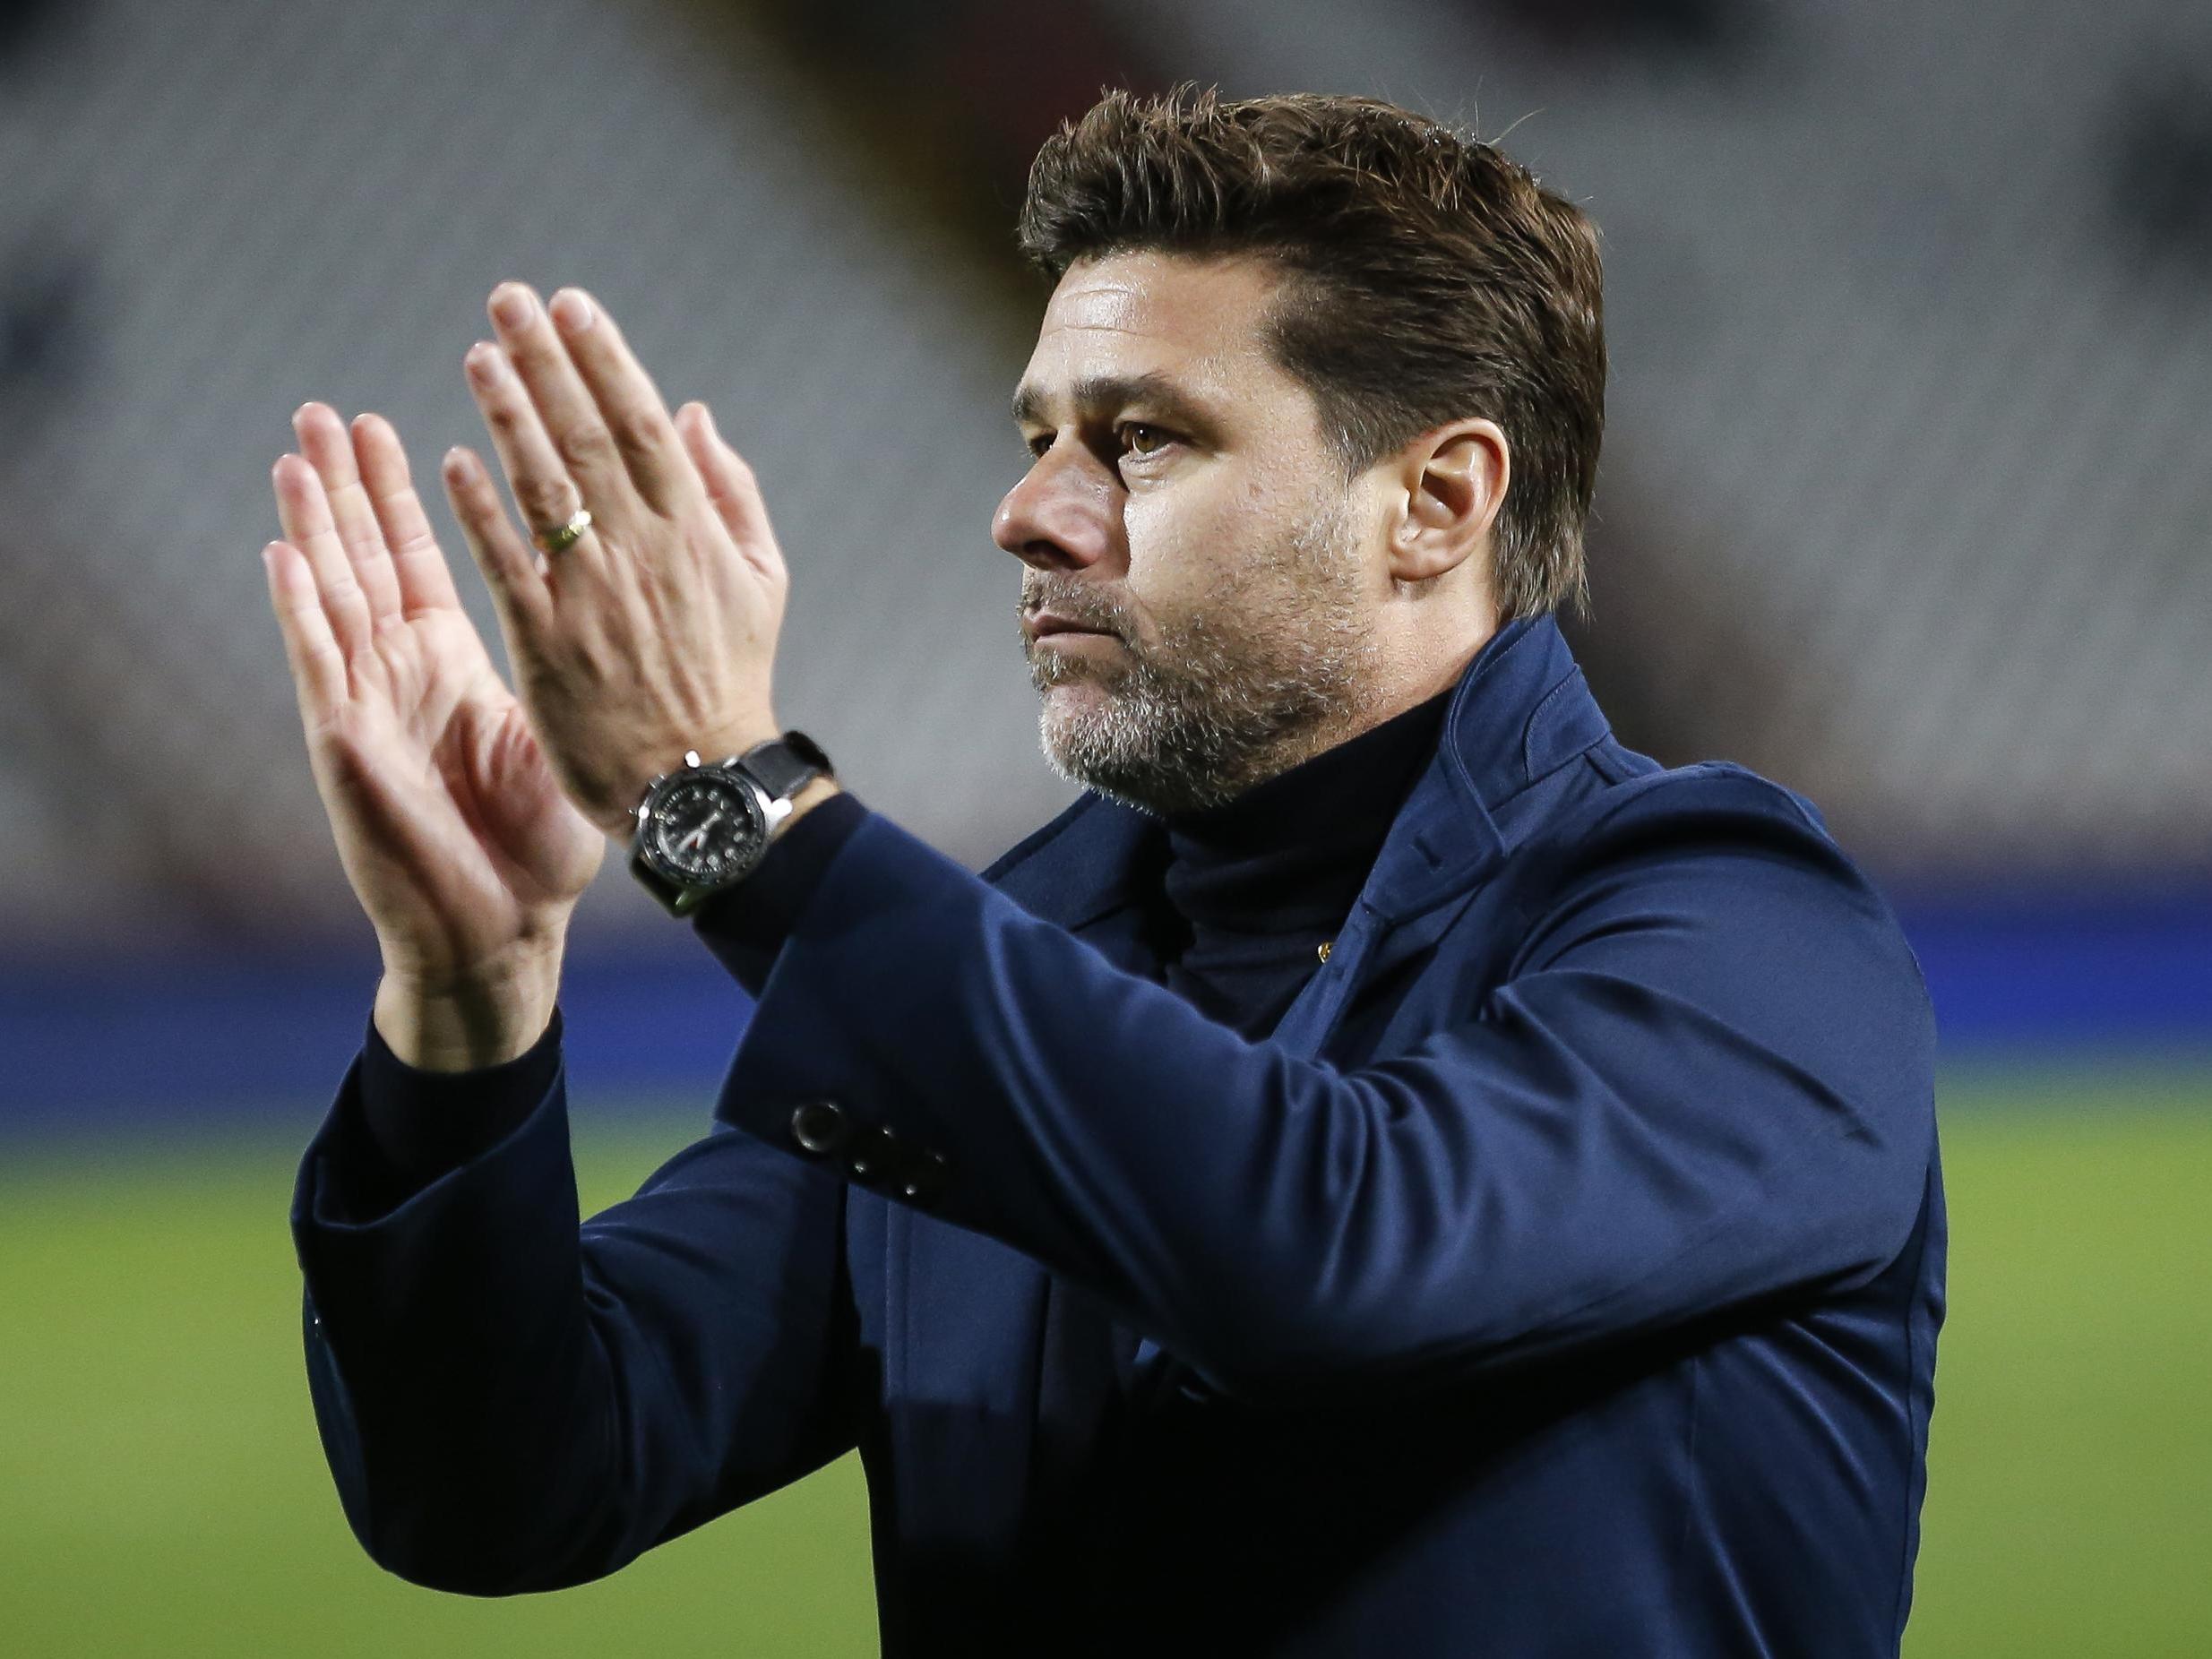 Pochettino believes football has a role to play